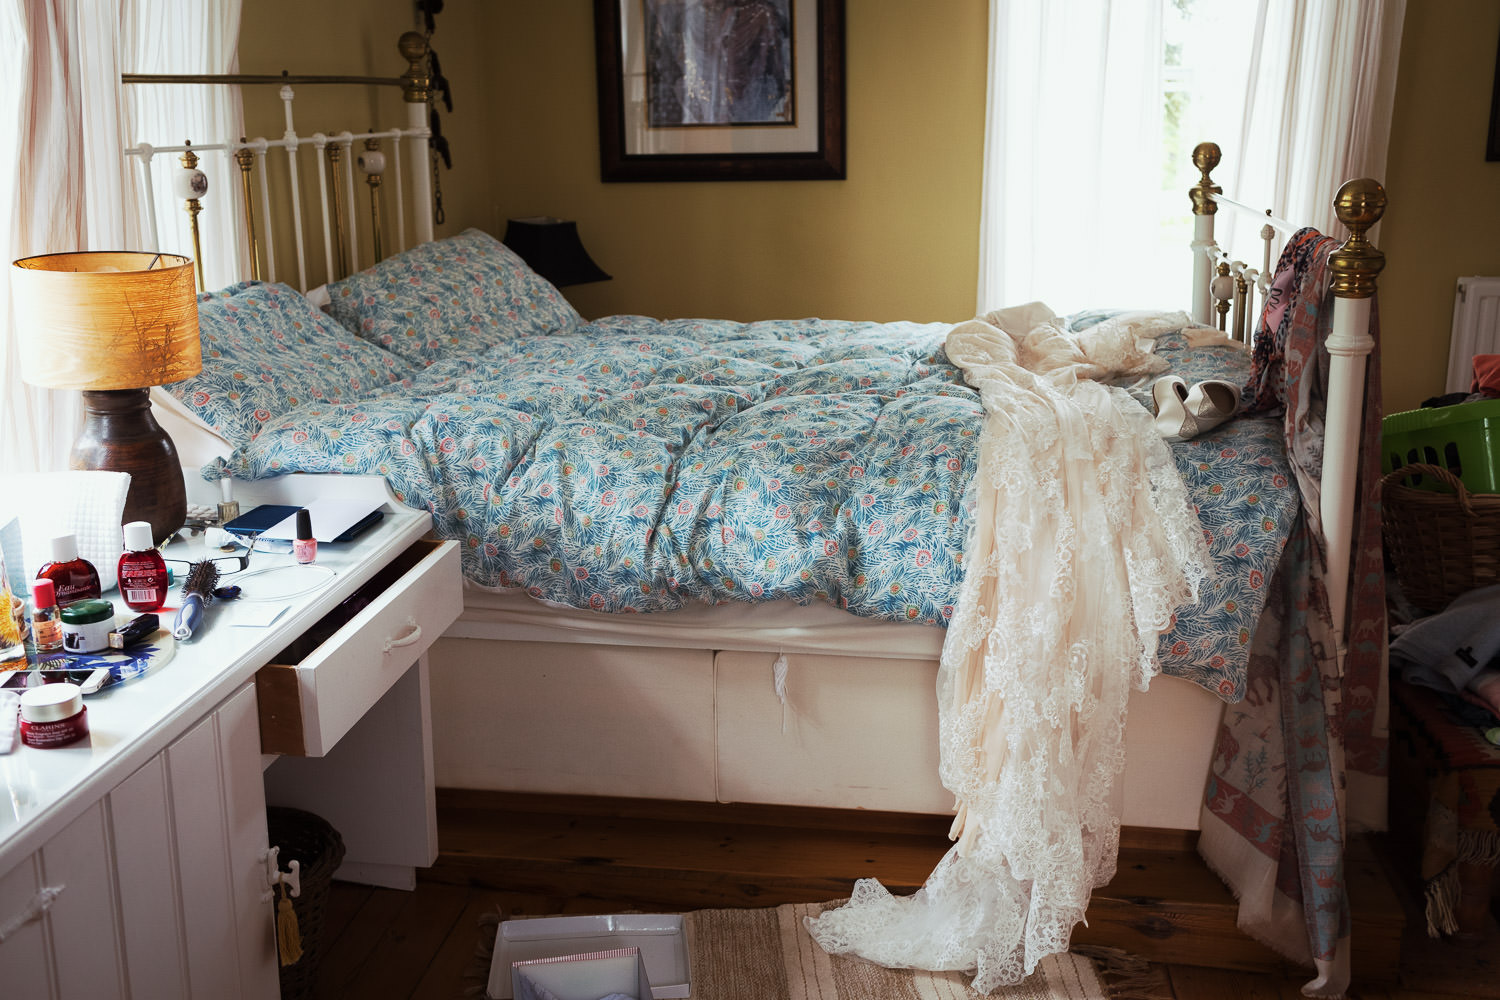 A wedding dress lying on a bed. Documentary style wedding photography in Great Totham, Maldon.